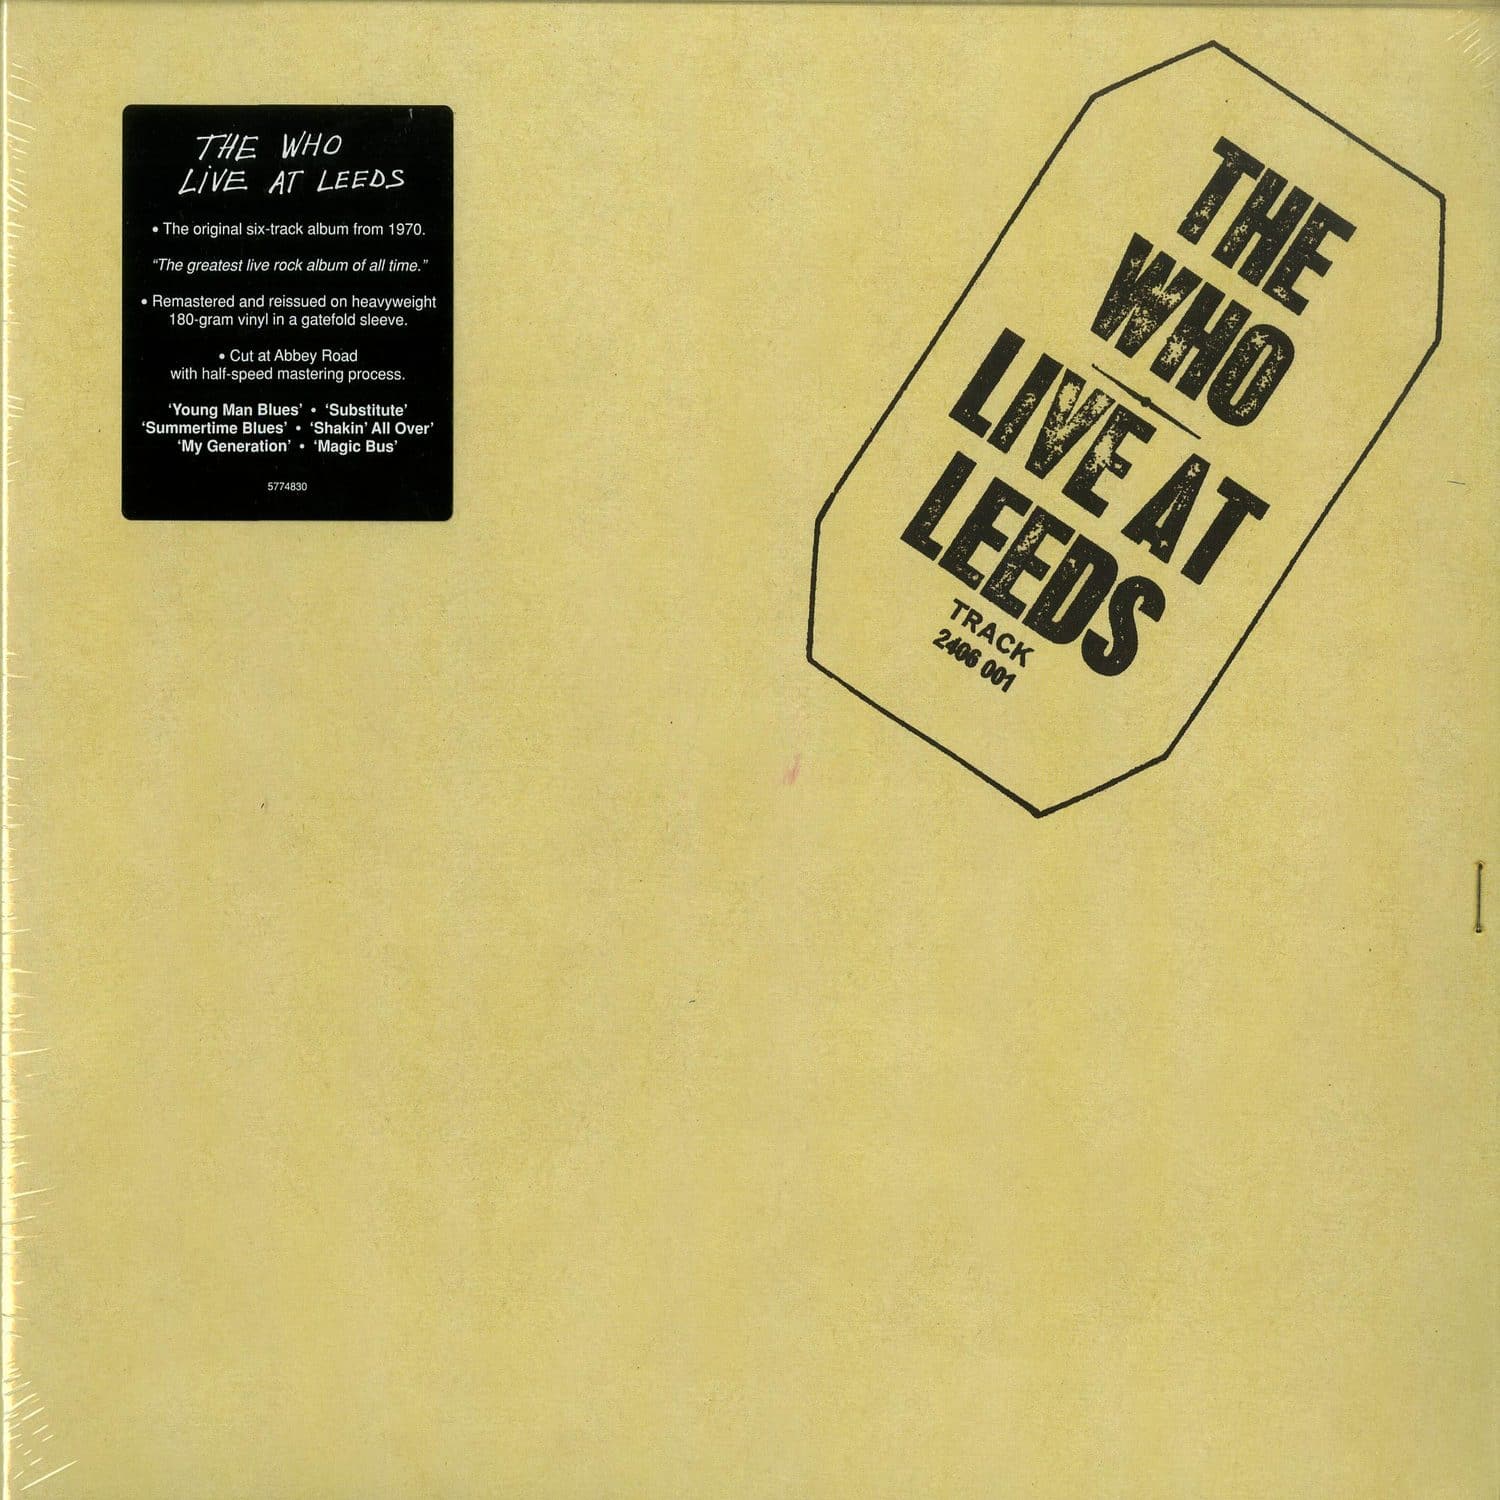 The Who - LIVE AT LEEDS 